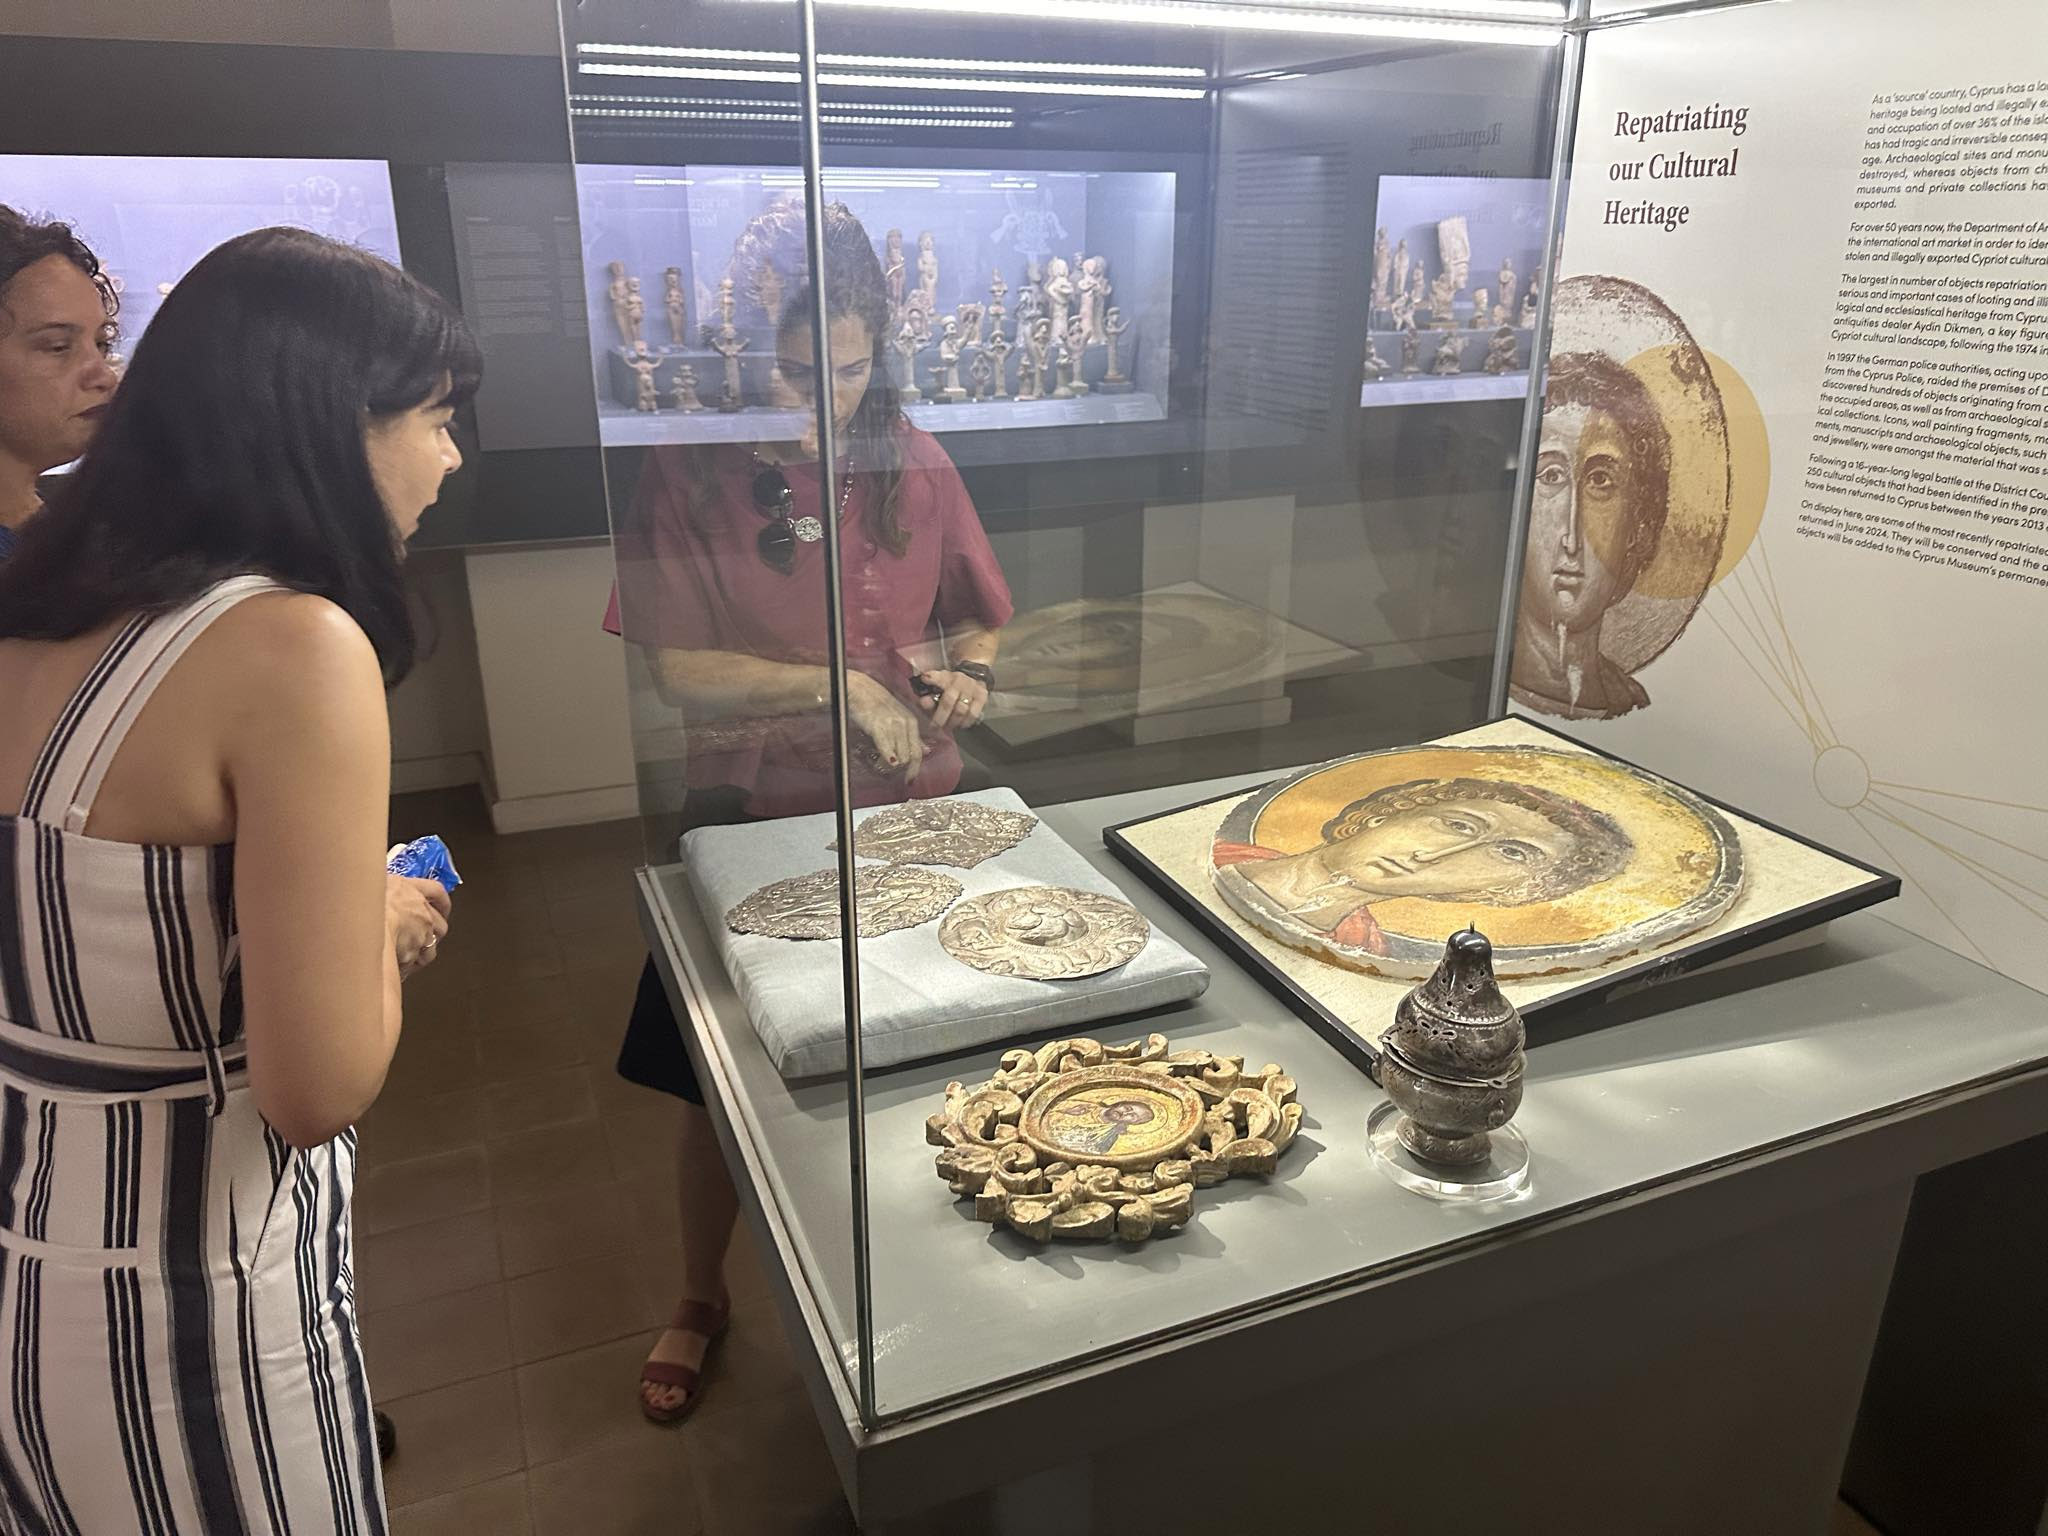 Returned items reflect struggle to recover cultural heritage